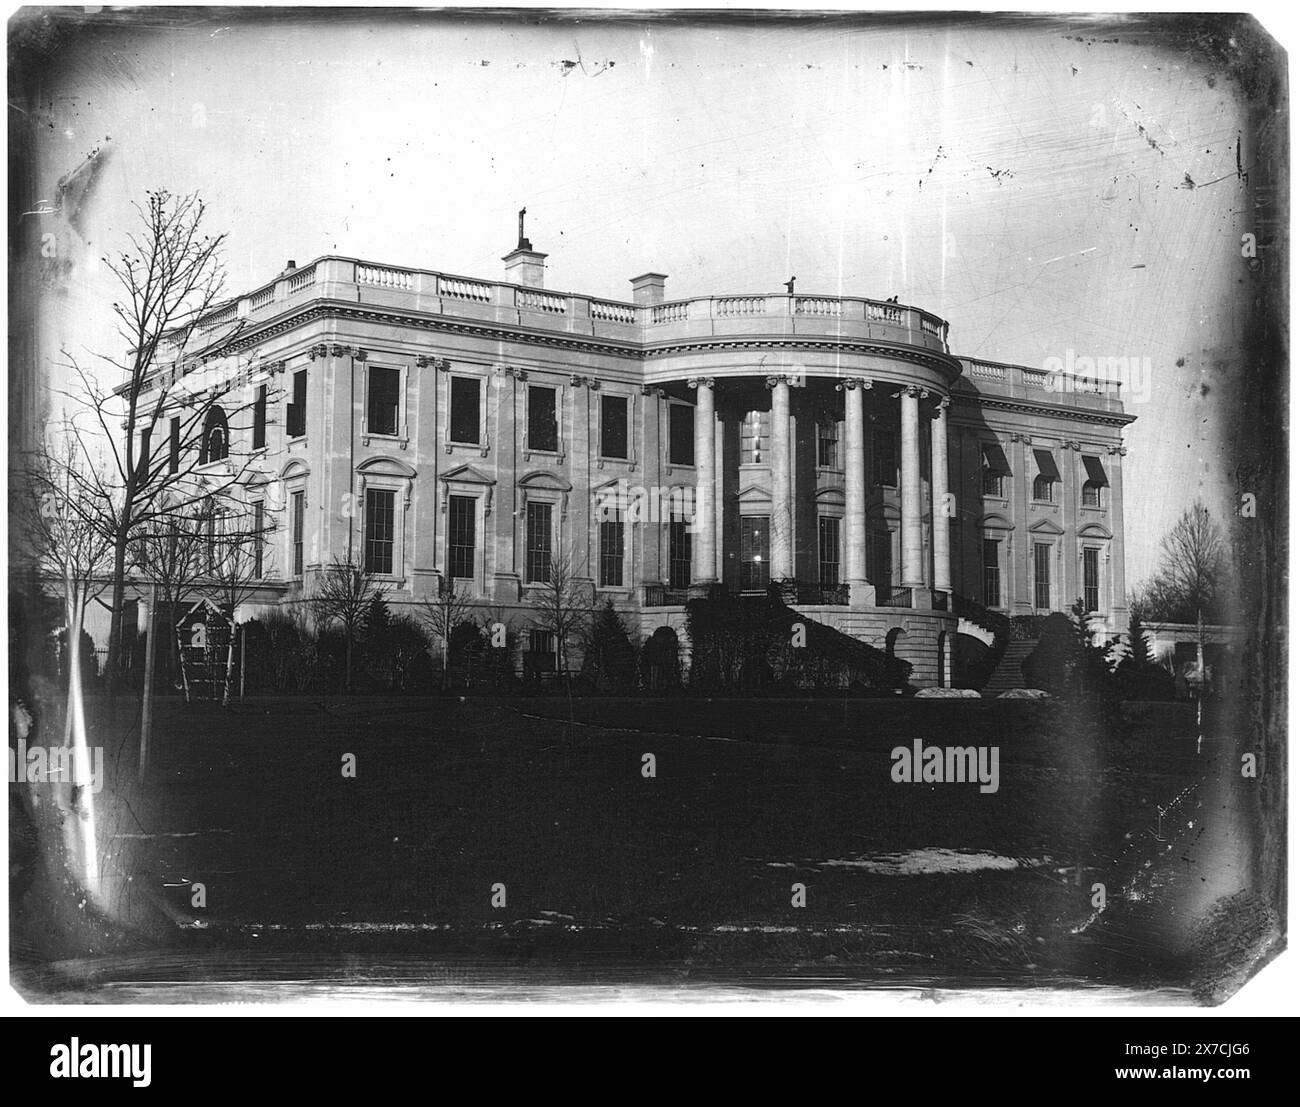 President's house (i.e. White House), Washington, D.C., showing south side, probably taken in winter, Caption label from exhibit 'American Treasures Imagination': Early Views of Washington. Several government buildings were among the first edifices in the nation's capital to be recorded by the relatively new medium of photography. John Plumbe, Jr., the first professional photographer in Washington, D.C., operated a studio in the mid-1840s. His daguerreotype of the south side of the White House was probably taken in the winter of 1846 during President James K. Polk's administration., Purchase; Stock Photo